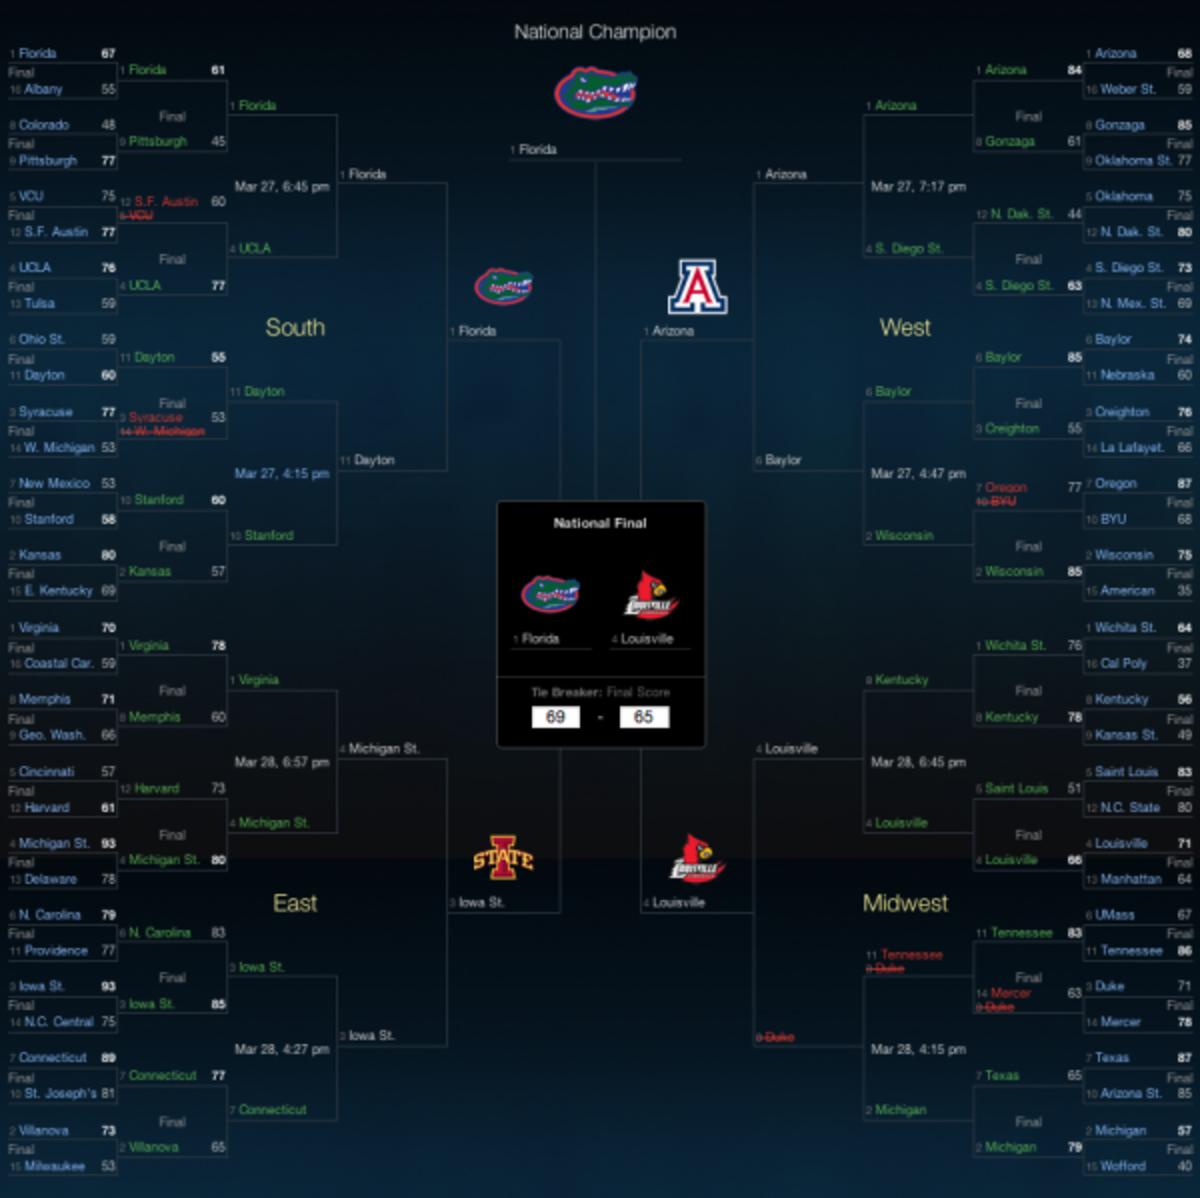 The current top-rated bracket in the Billion Dollar Bracket Challenge